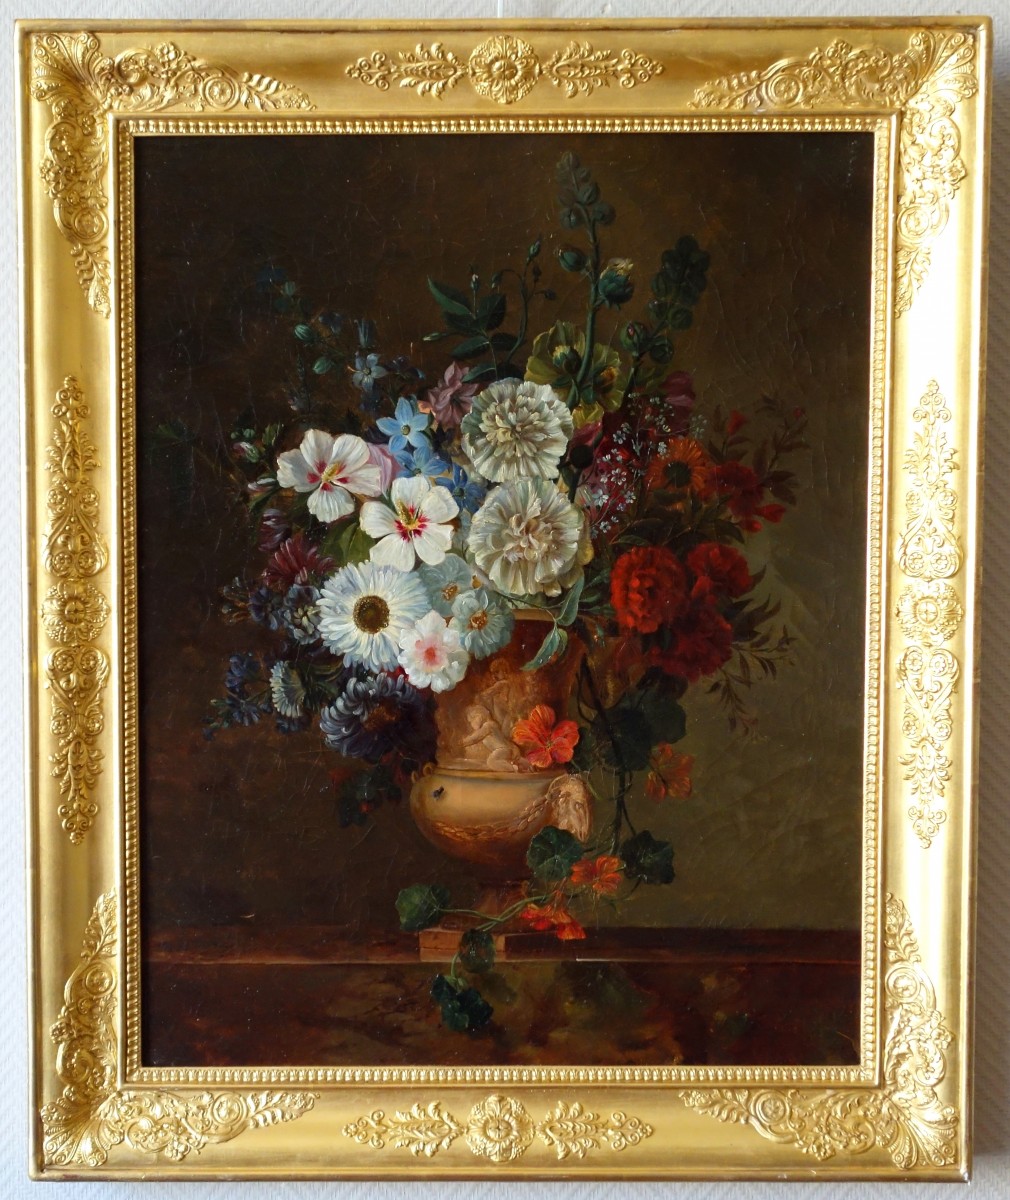 SOLD - French Framed Oil on Canvas 19th Century Dutch School Style Floral  Painting